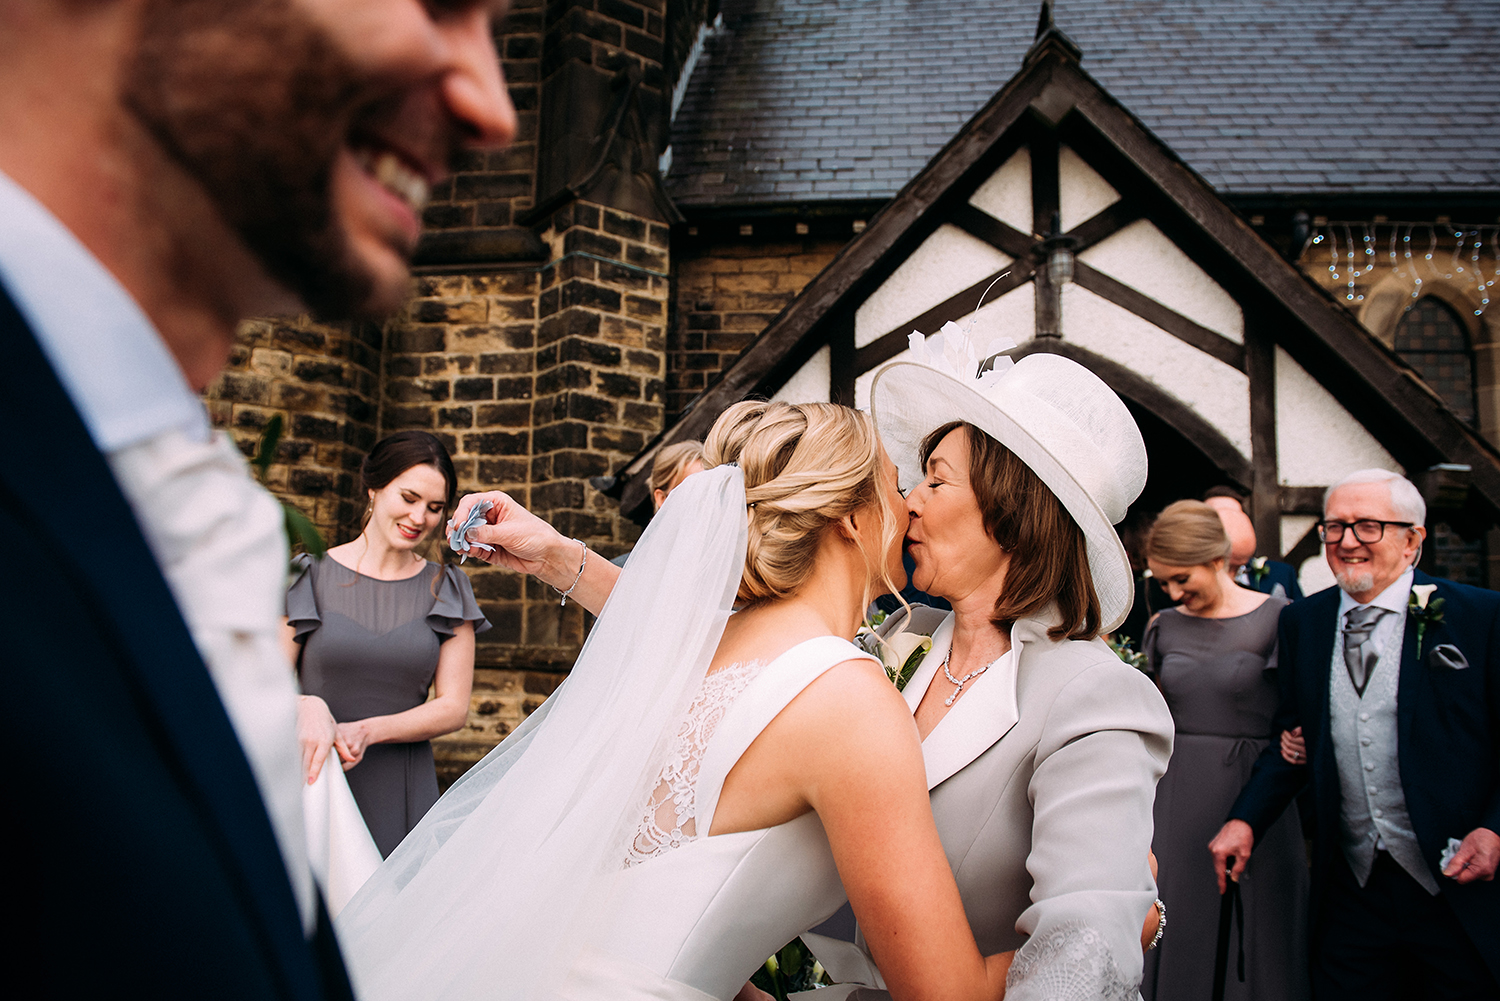  layered shot of bride and mother kissing, also has groom and bridesmaids in the foreground and background 